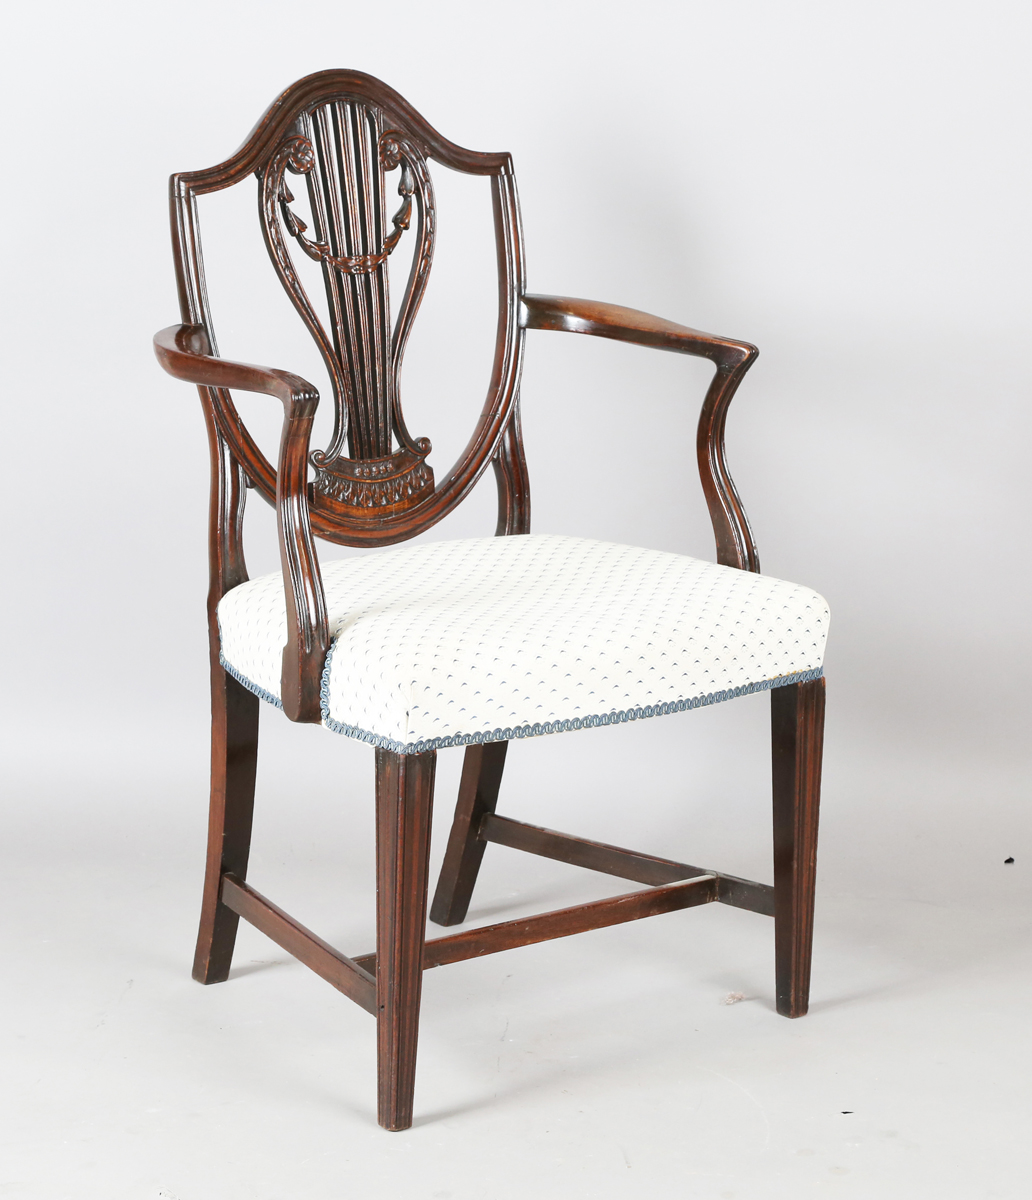 A George III mahogany shield back elbow chair, the seat covered in a patterned damask, height